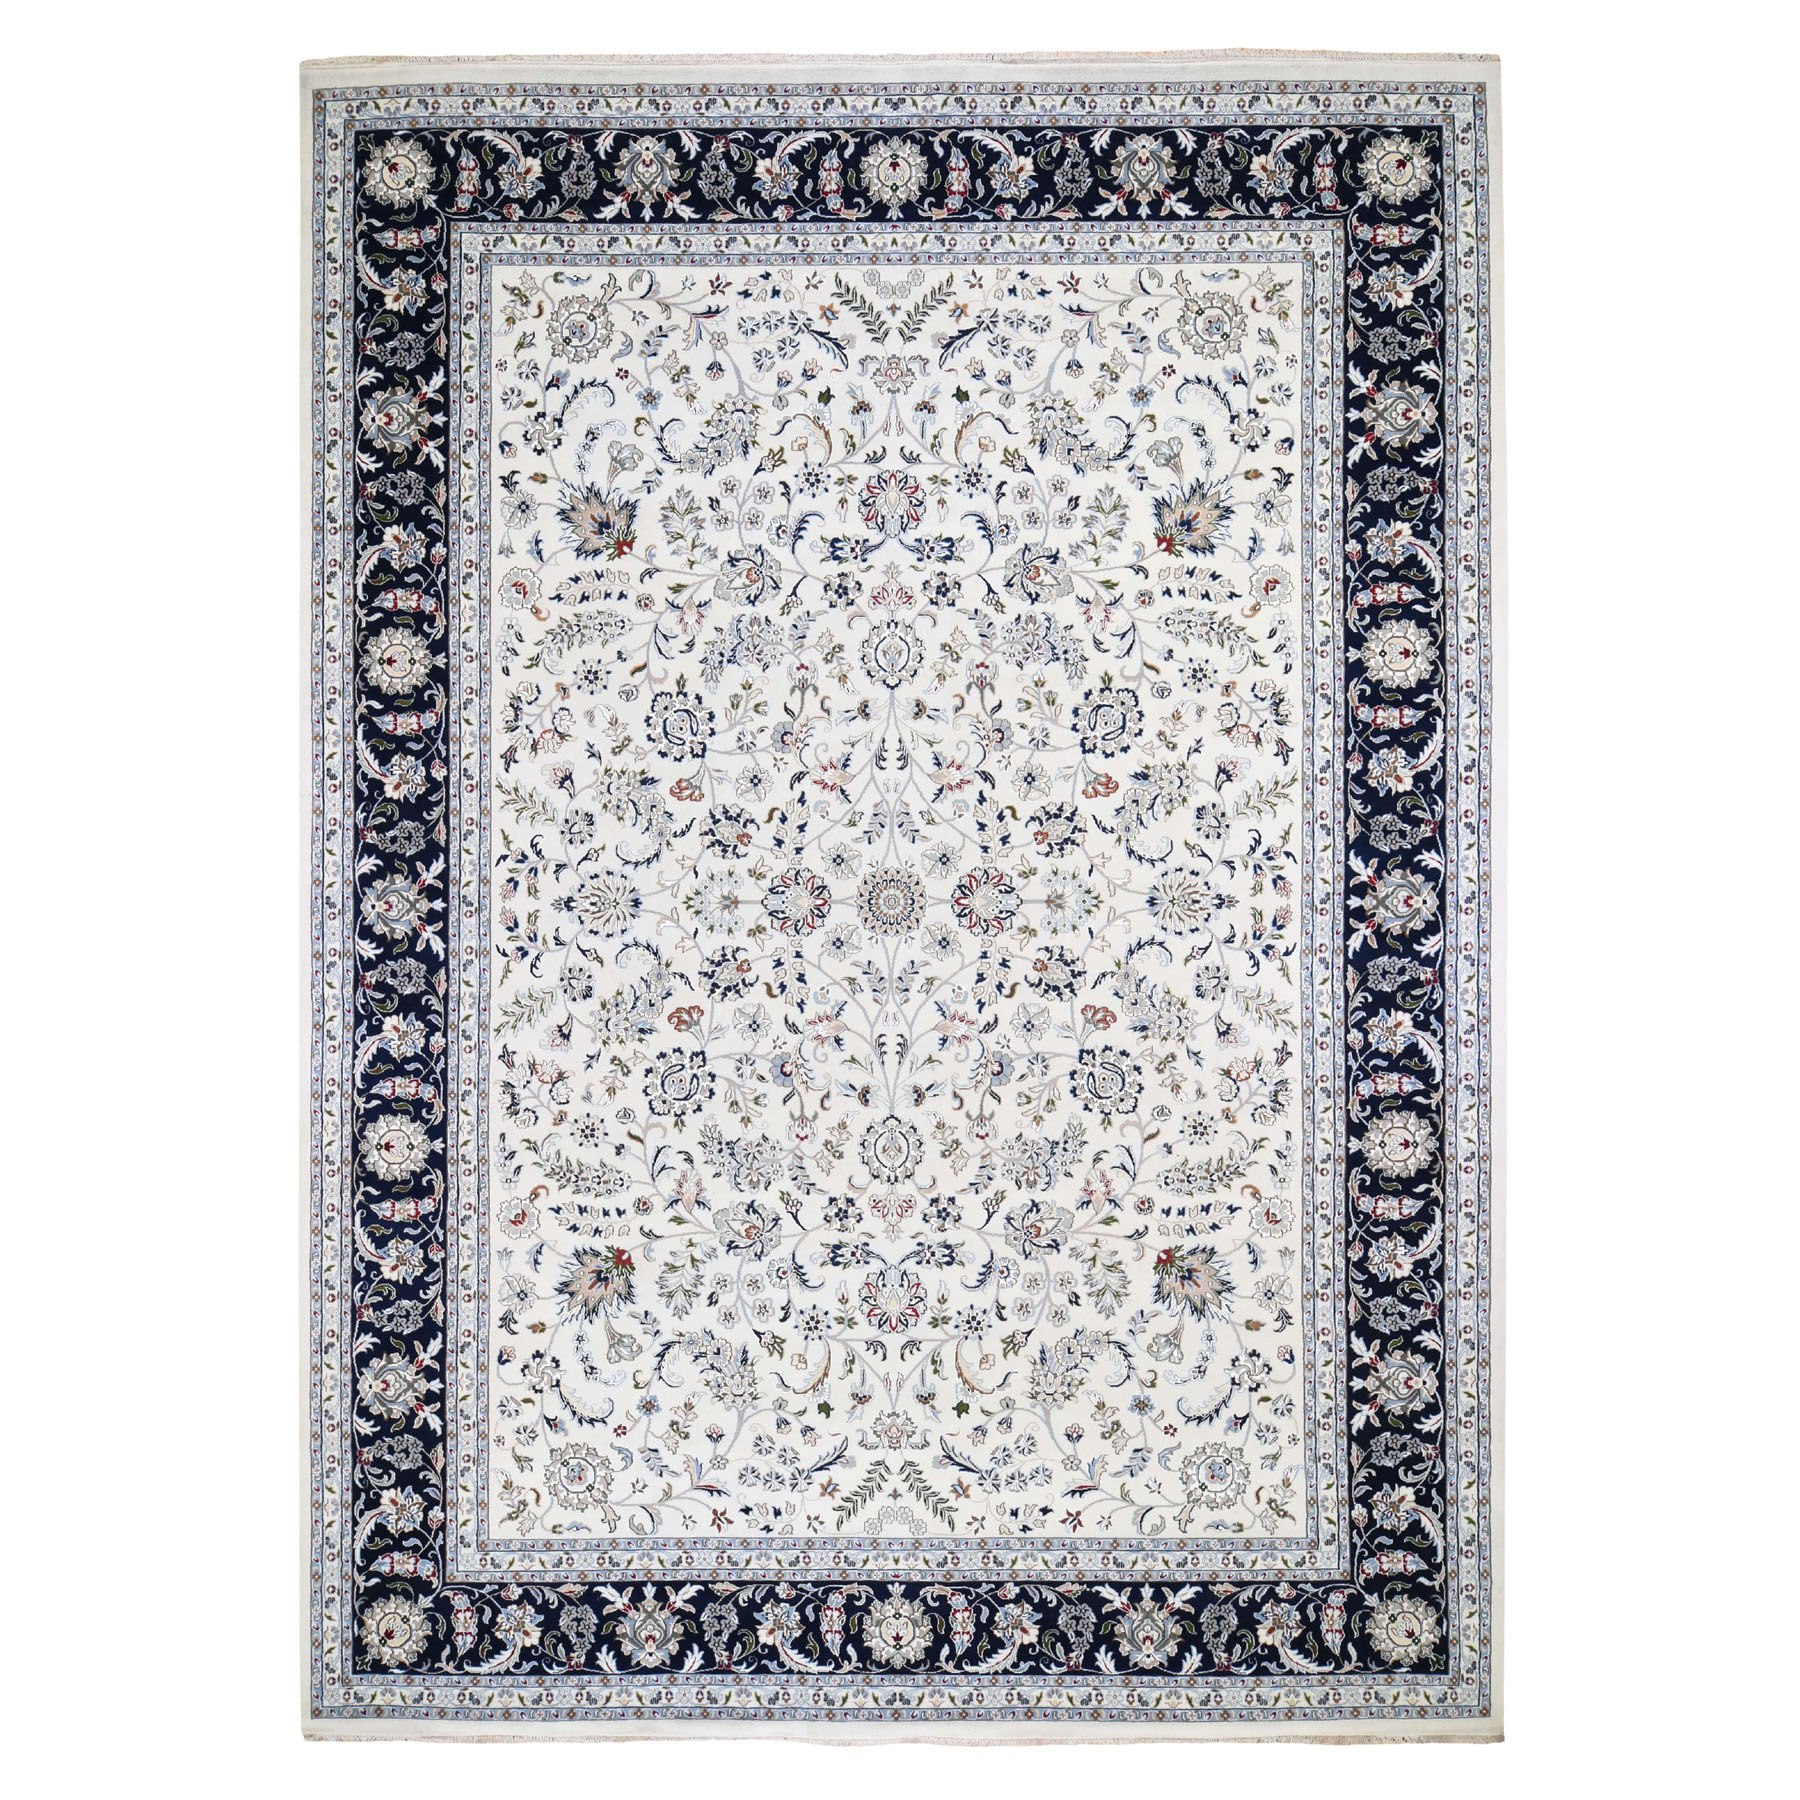 10-x14- Wool And Silk 250 KPSI All Over Design Ivory Nain Hand Knotted Oriental Rug 